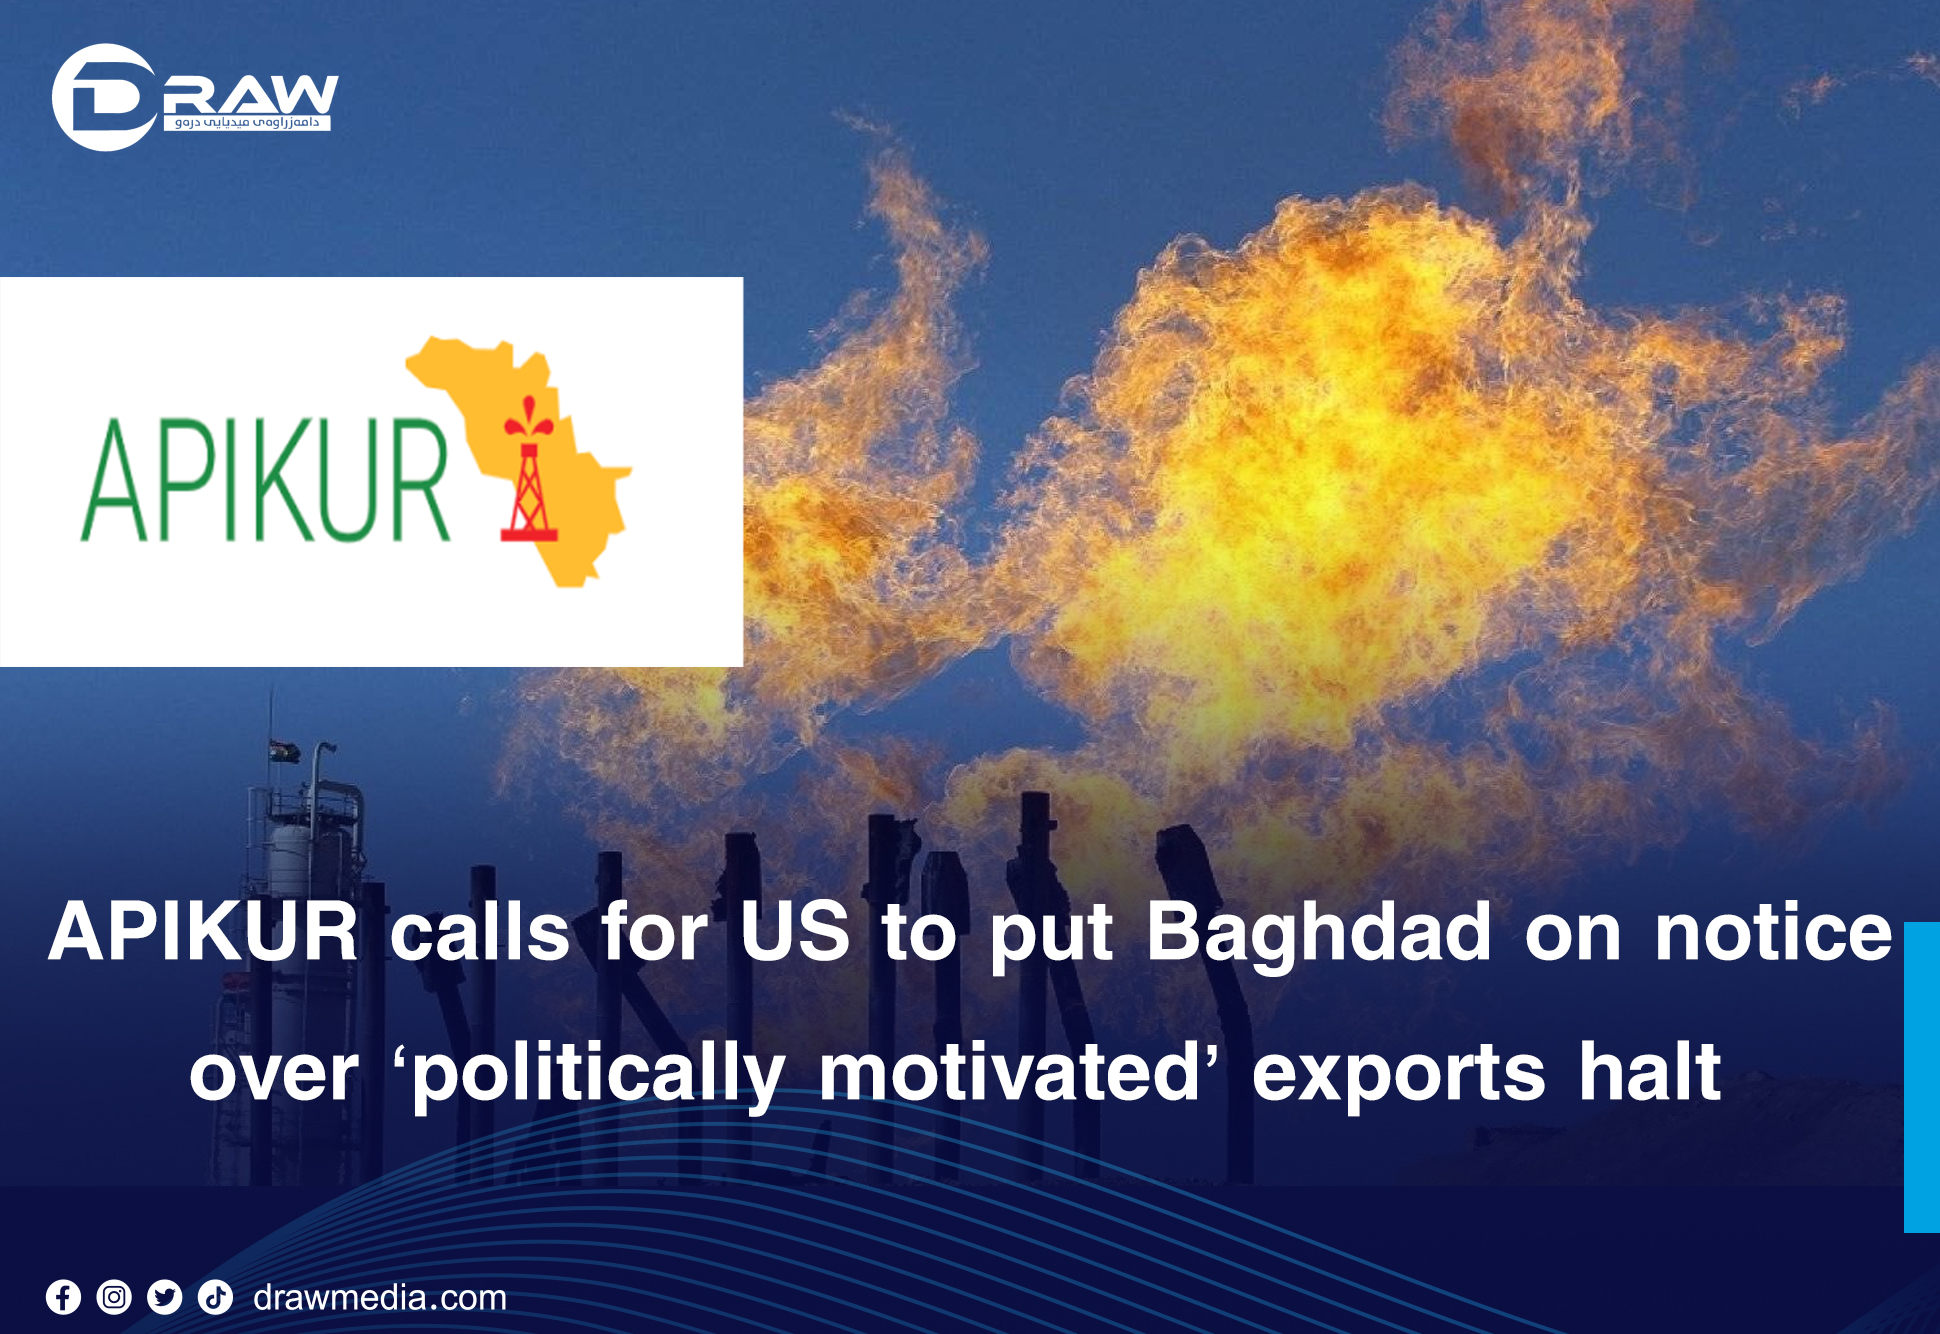 DrawMedia.net / APIKUR calls for US to put Baghdad ‘on notice’ over ‘politically motivated’ exports halt